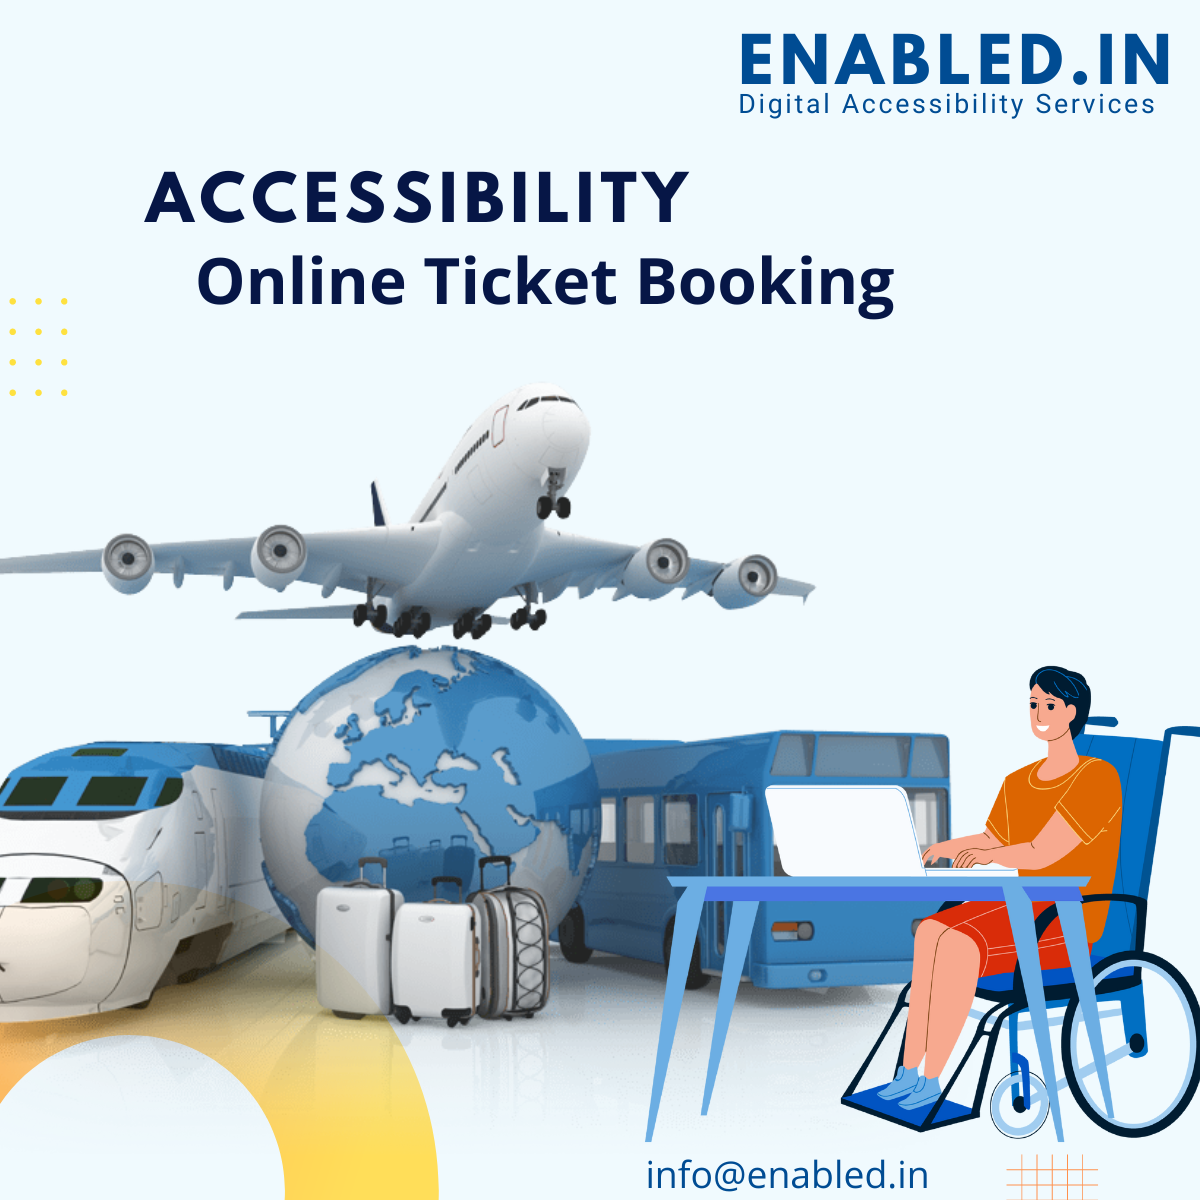 How to make improve your Online Booking Accessibility